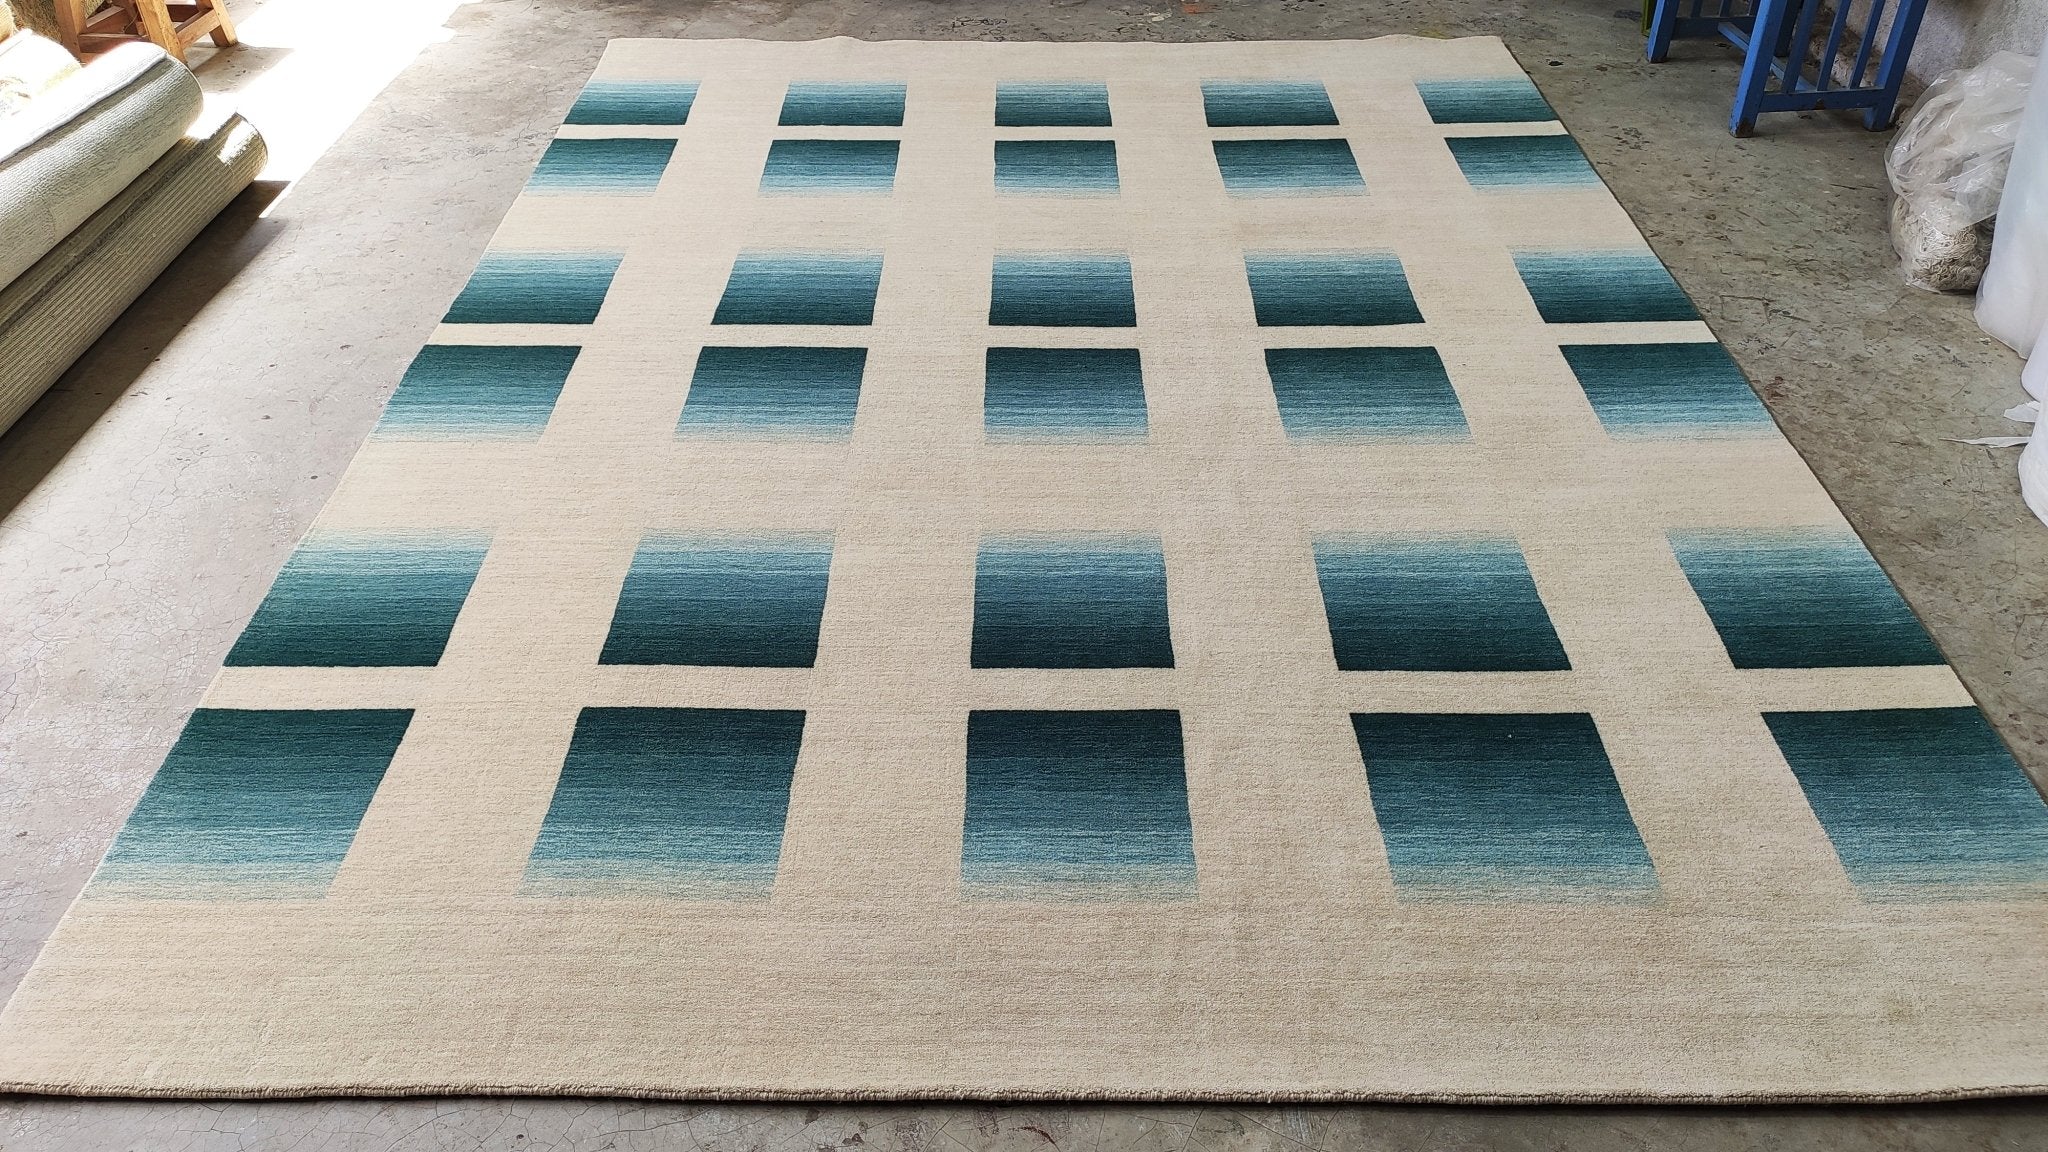 Large Area Rugs 8x11 Contemporary Rugs 8x10 Black 5x7 Rugs 5x8 Blue Rug 2x3  Mat